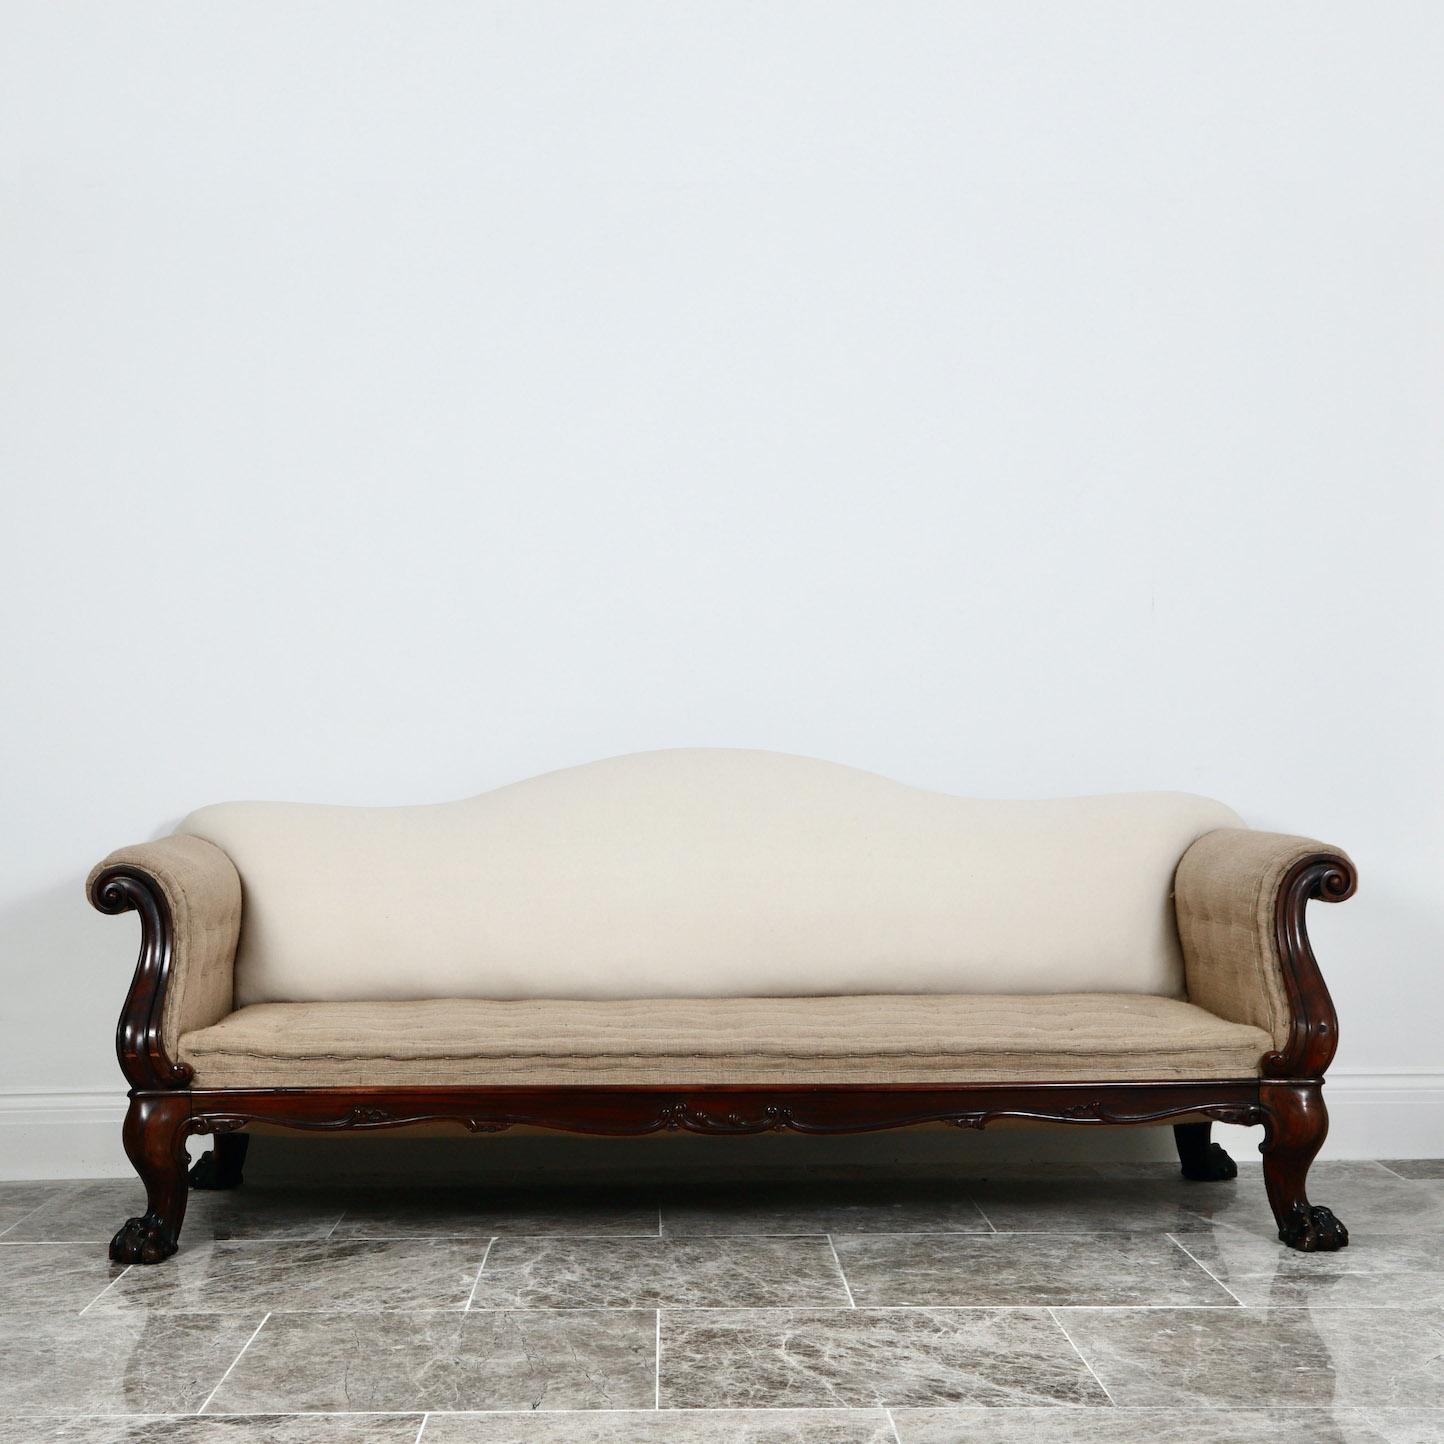 Vagabond antiques presents a 19th centry goncalo alves sofa

England, Circa 1835

” Attributed to Gillows, a large scale goncalo alves sofa with outcurved acanthus carved arm terminals, above a shaped foliate scrolled and rocaille seat frame, on